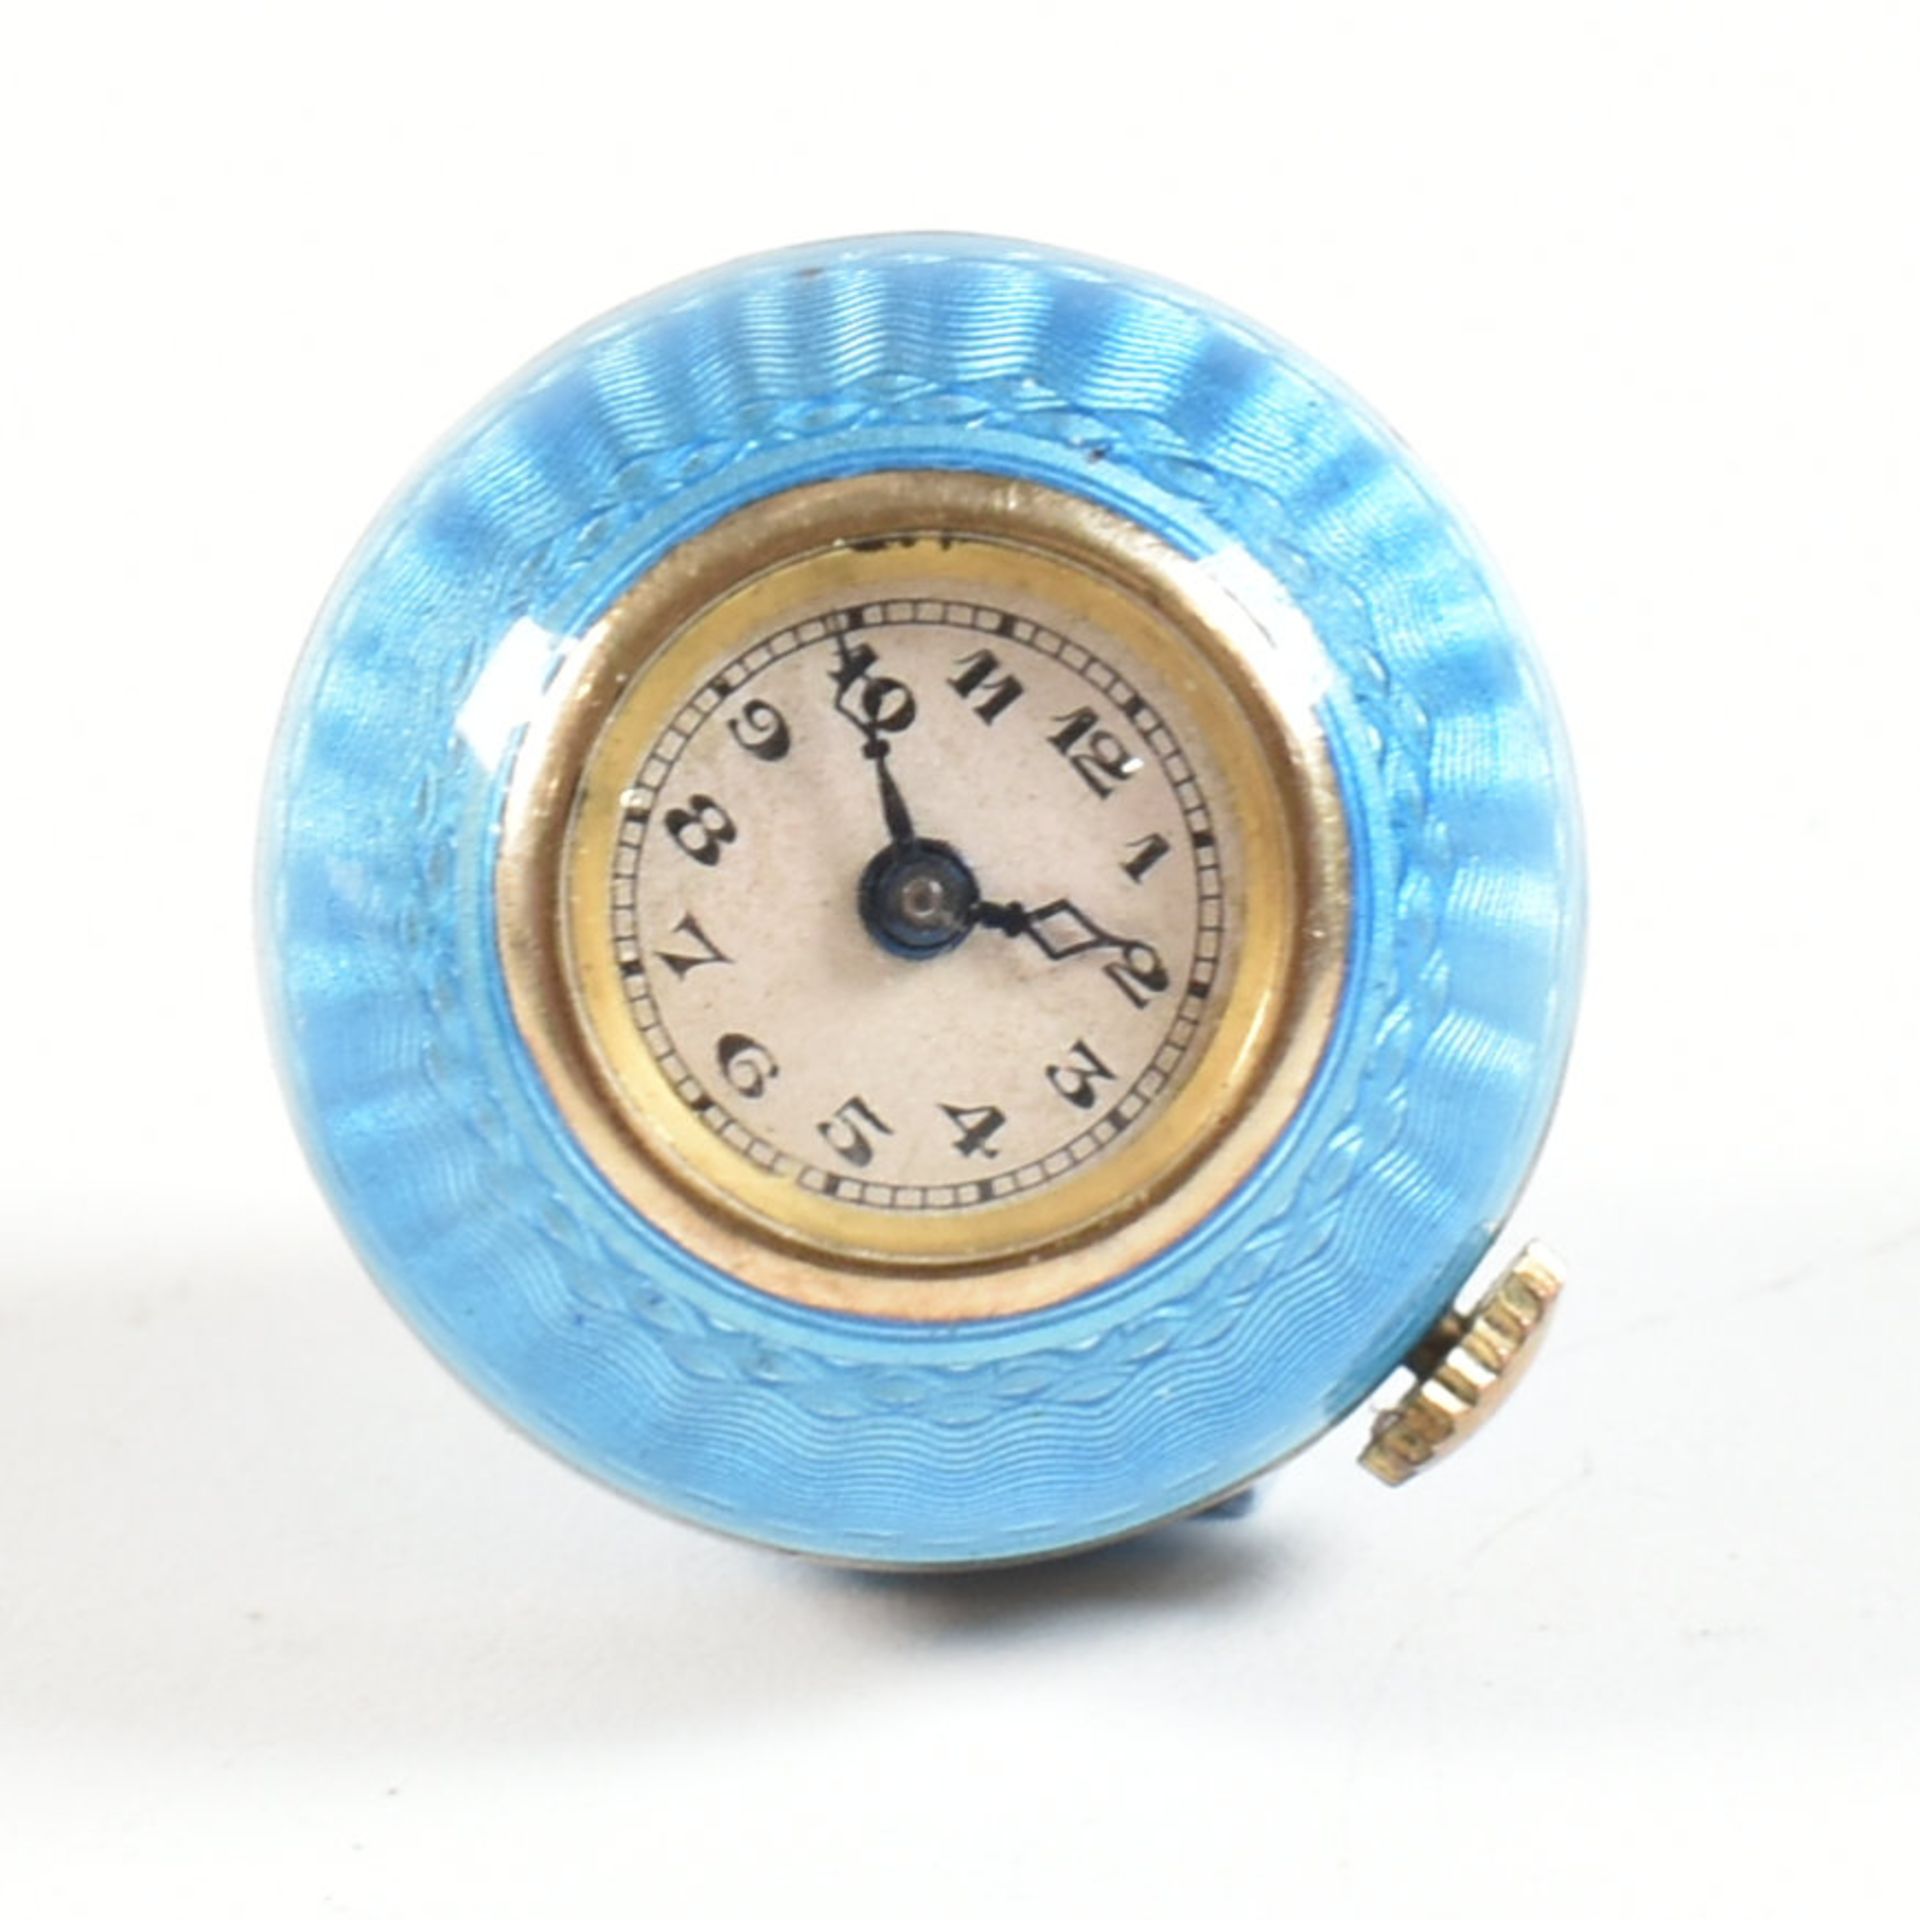 EARLY 20TH CENTURY SWISS SILVER ENAMEL BALL WATCH & CHAIN - Image 11 of 13